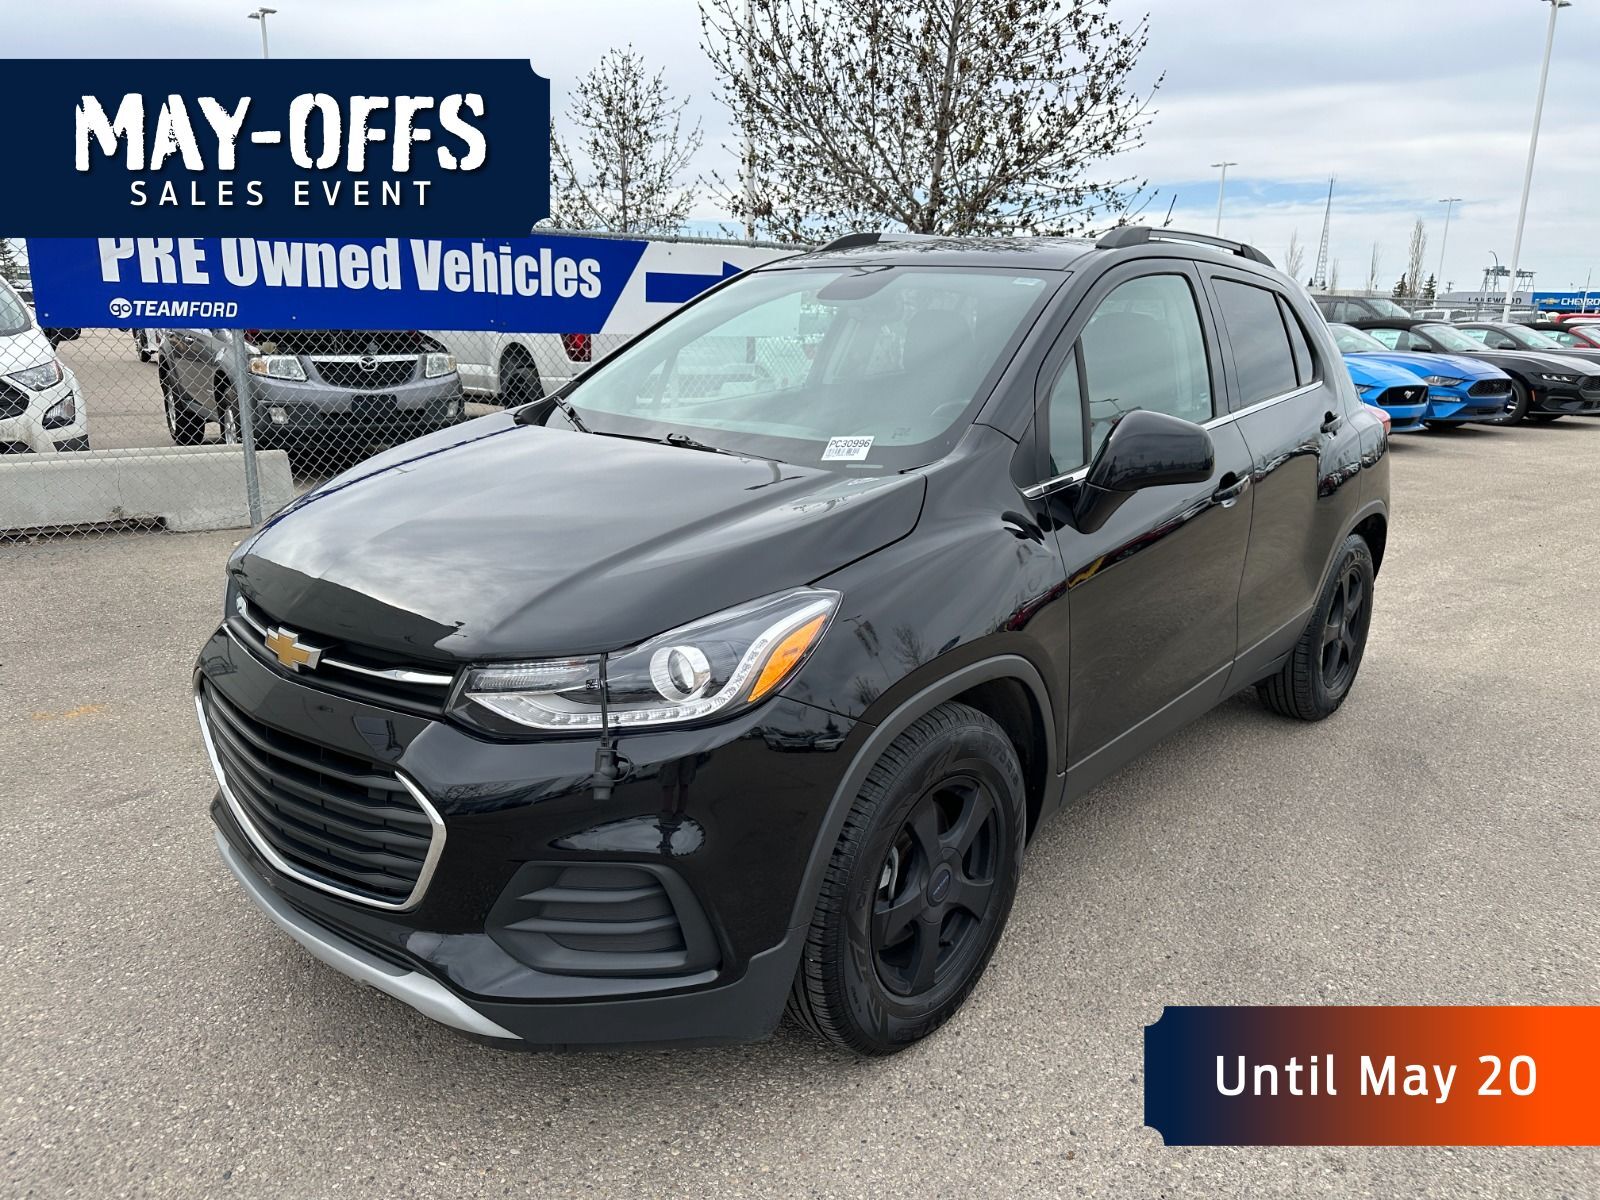 2017 Chevrolet Trax LT - AWD, CLOTH, BLUETOOTH, HEATED SEATS, A/C AND 